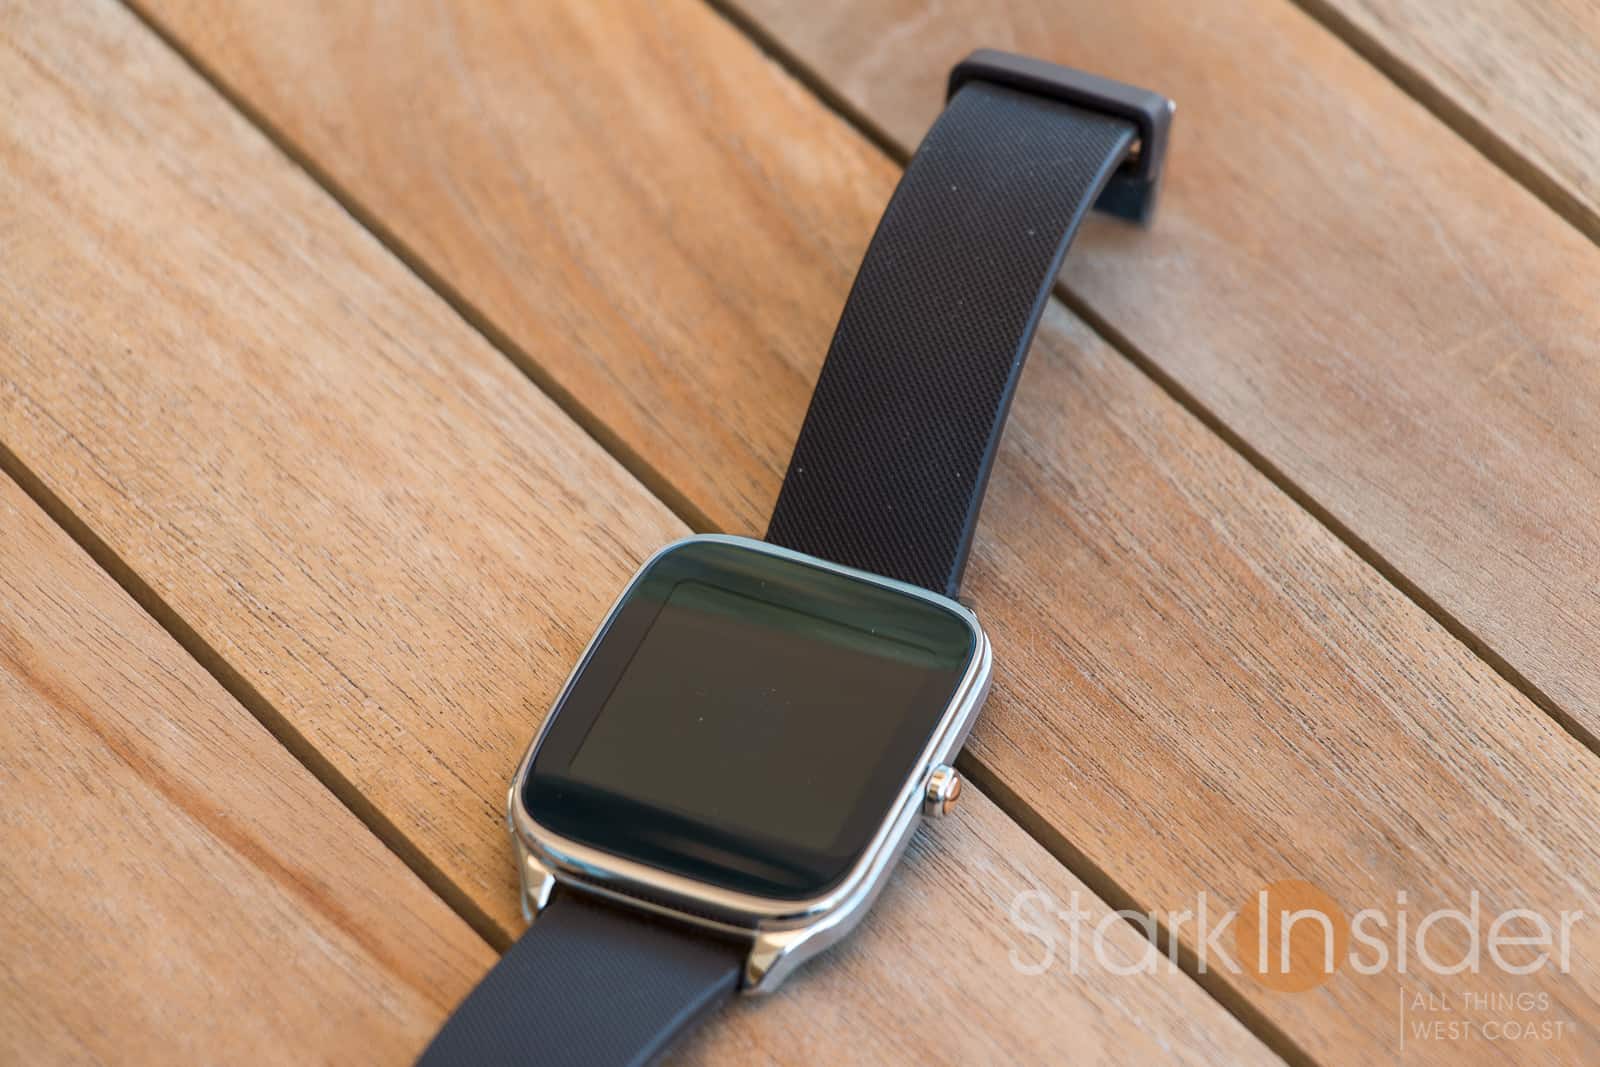 Asus ZenWatch launches in the UK on Dec 23 for £199